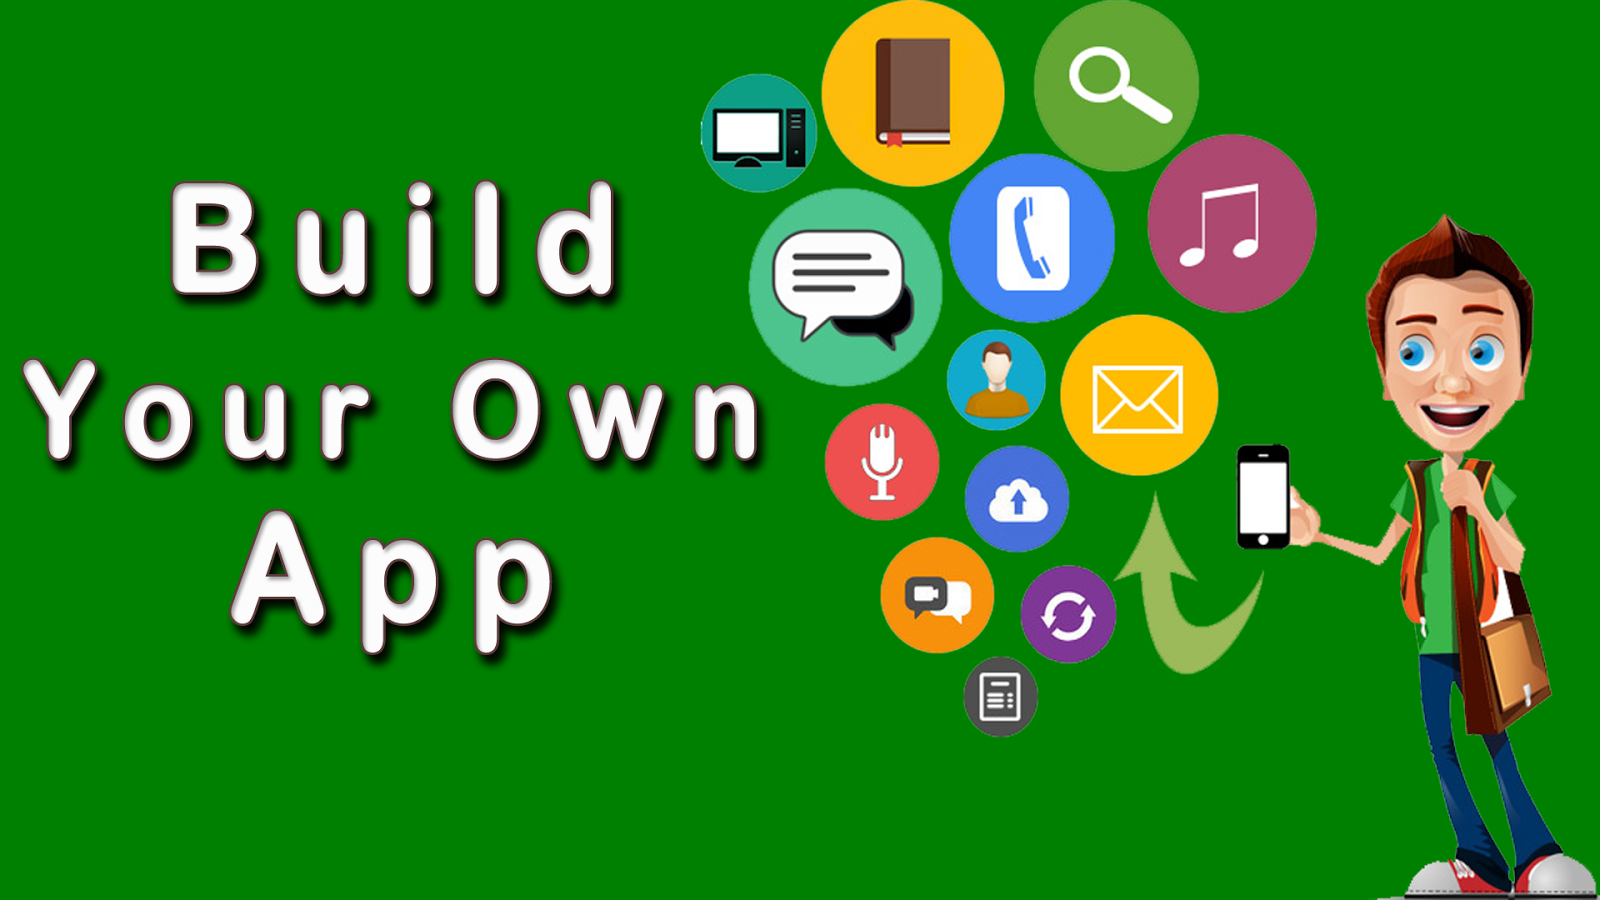 How To Build Your Own App in Urdu and Hindi: